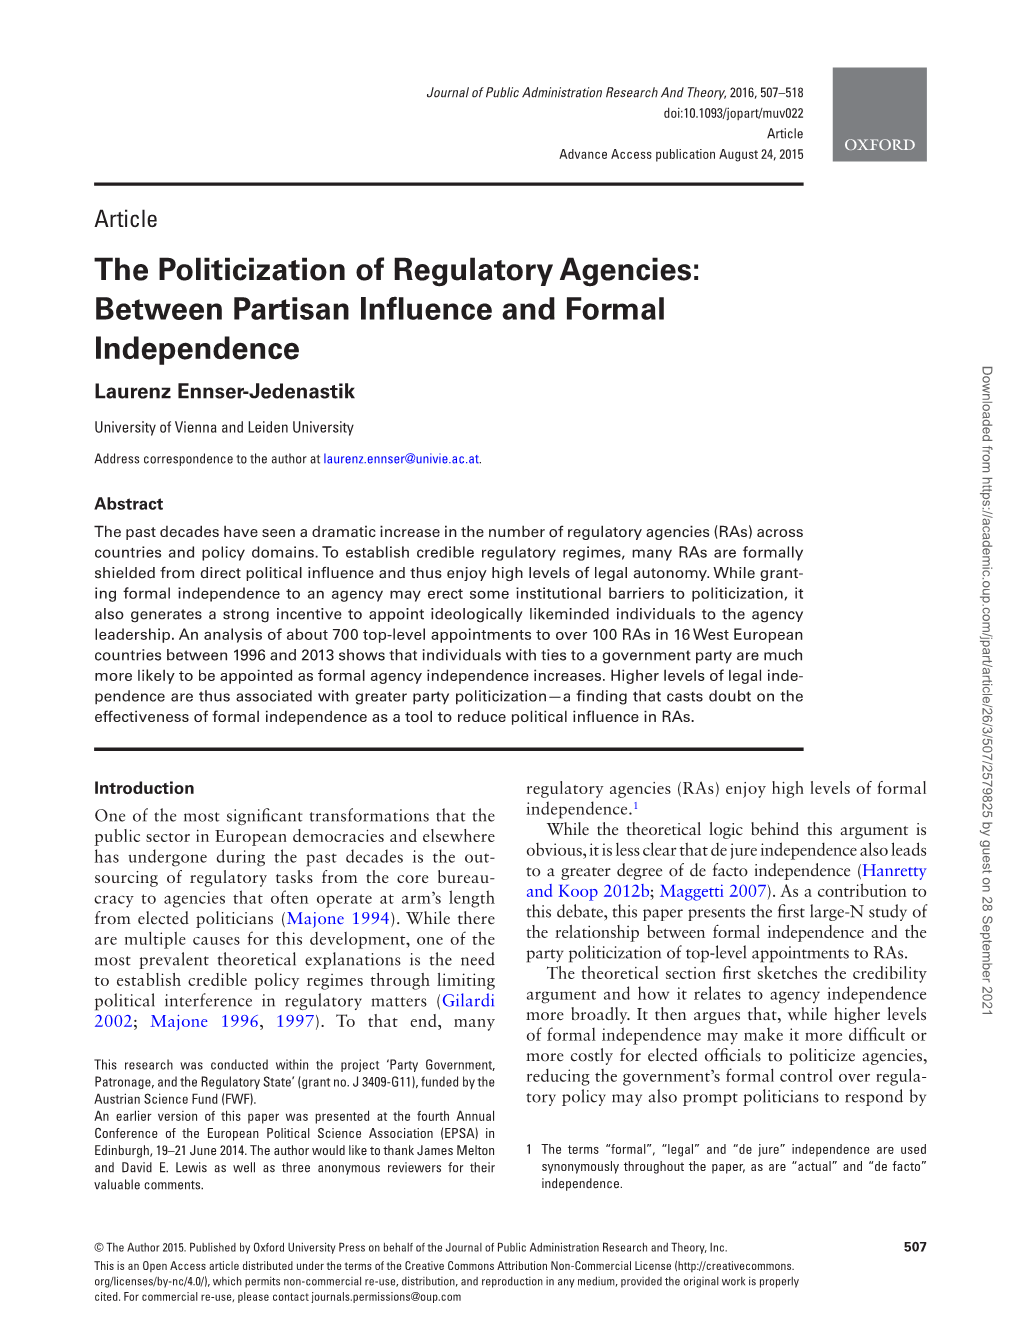 The Politicization of Regulatory Agencies: Between Partisan Influence and Formal